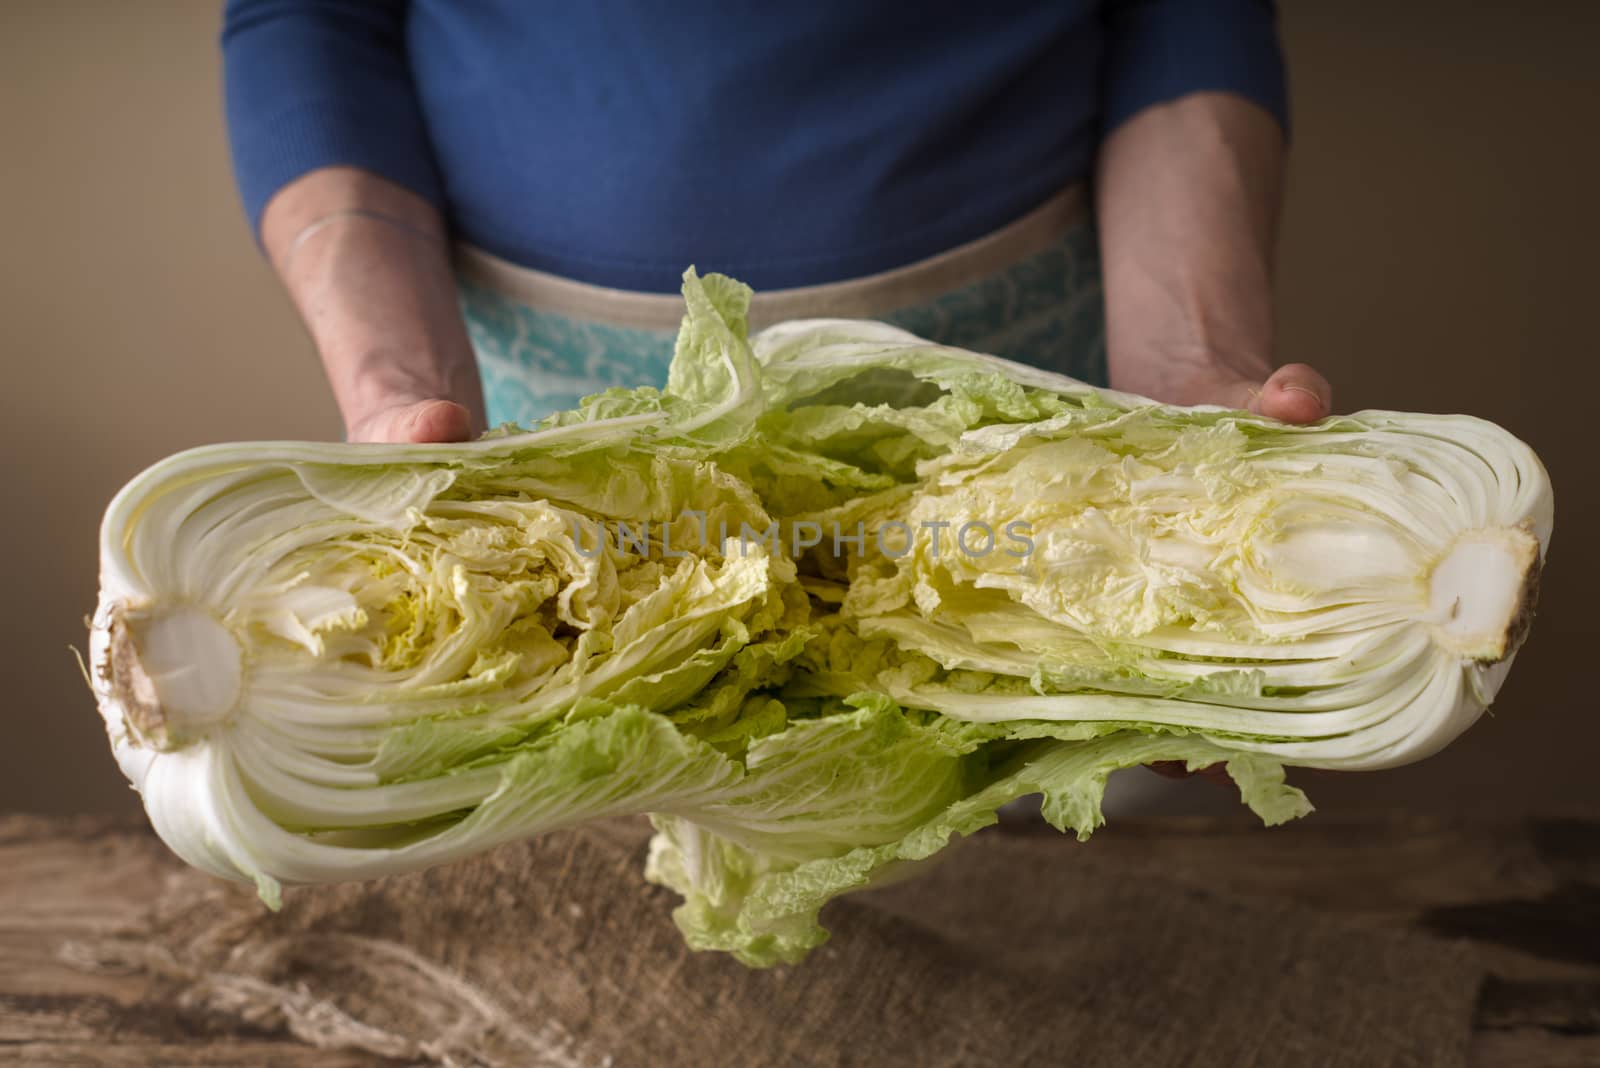 Woman shares the Chinese cabbage into two halves on the board horizontal